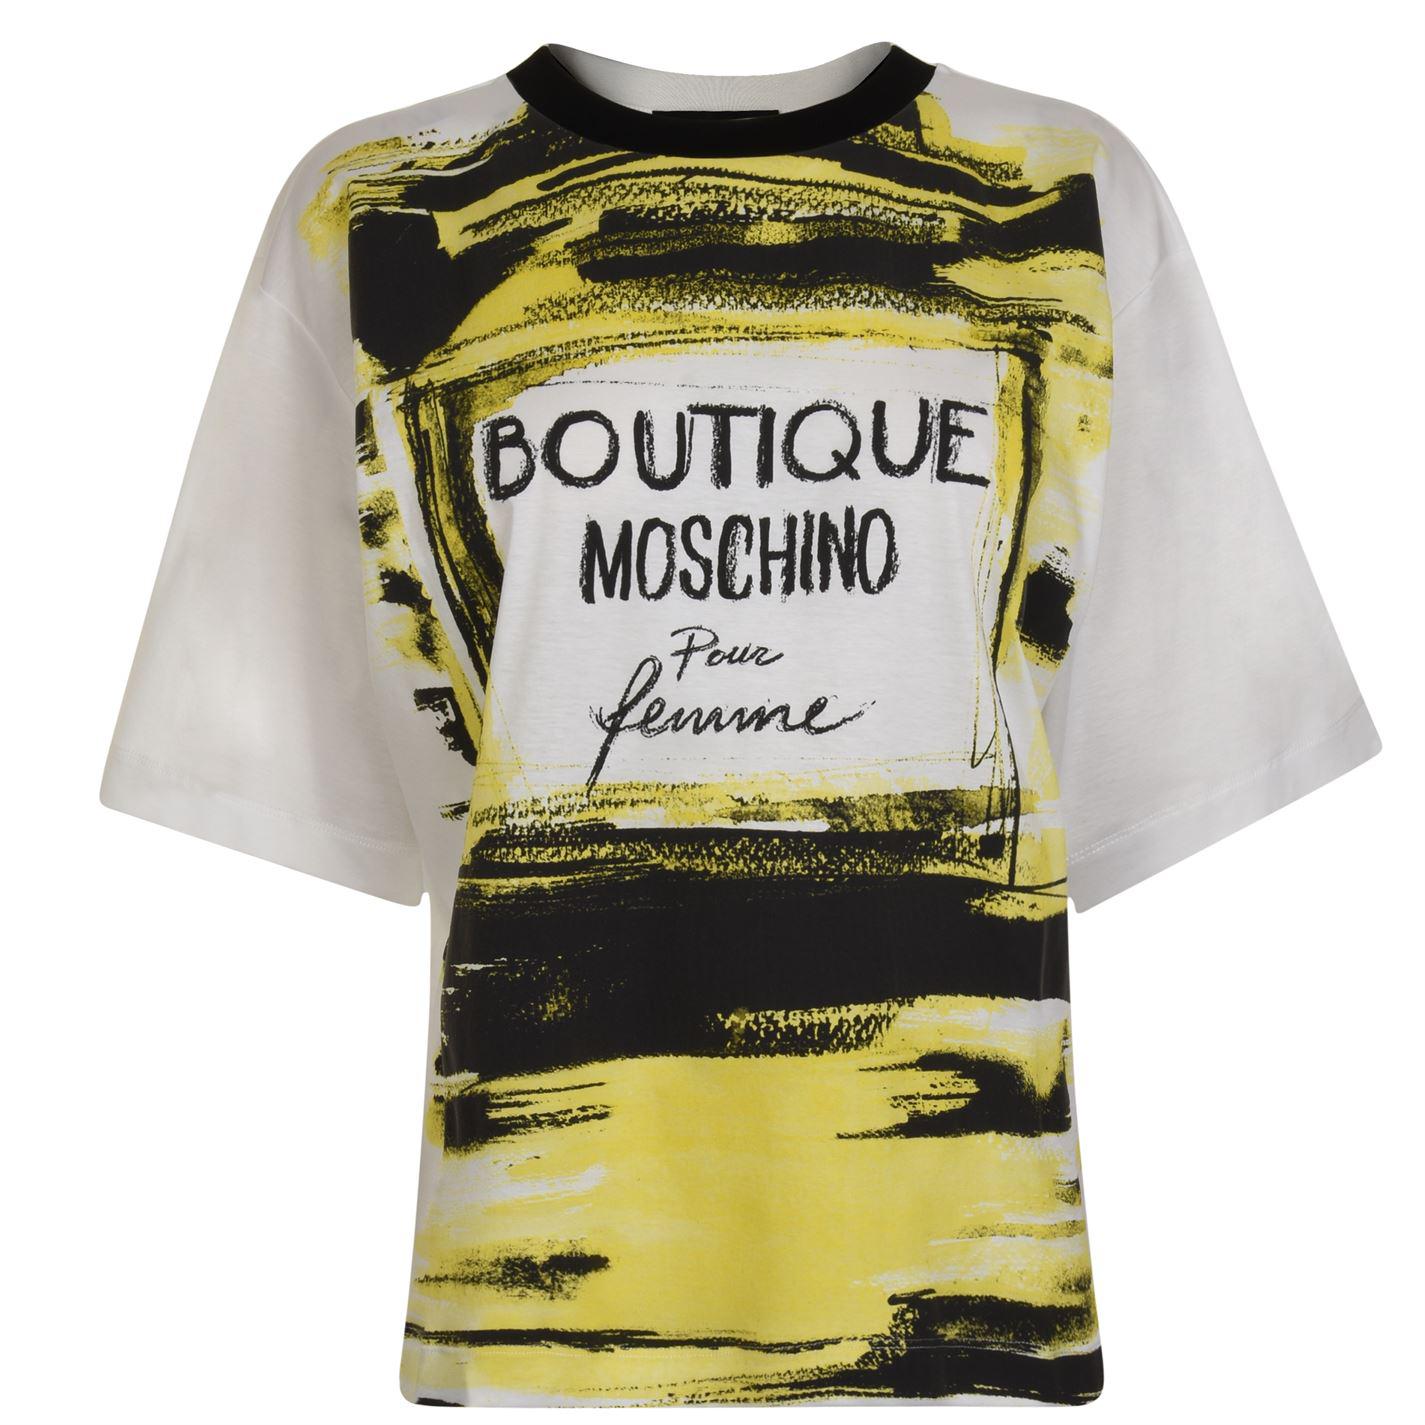 Lyst - Boutique Moschino Perfume T Shirt in White